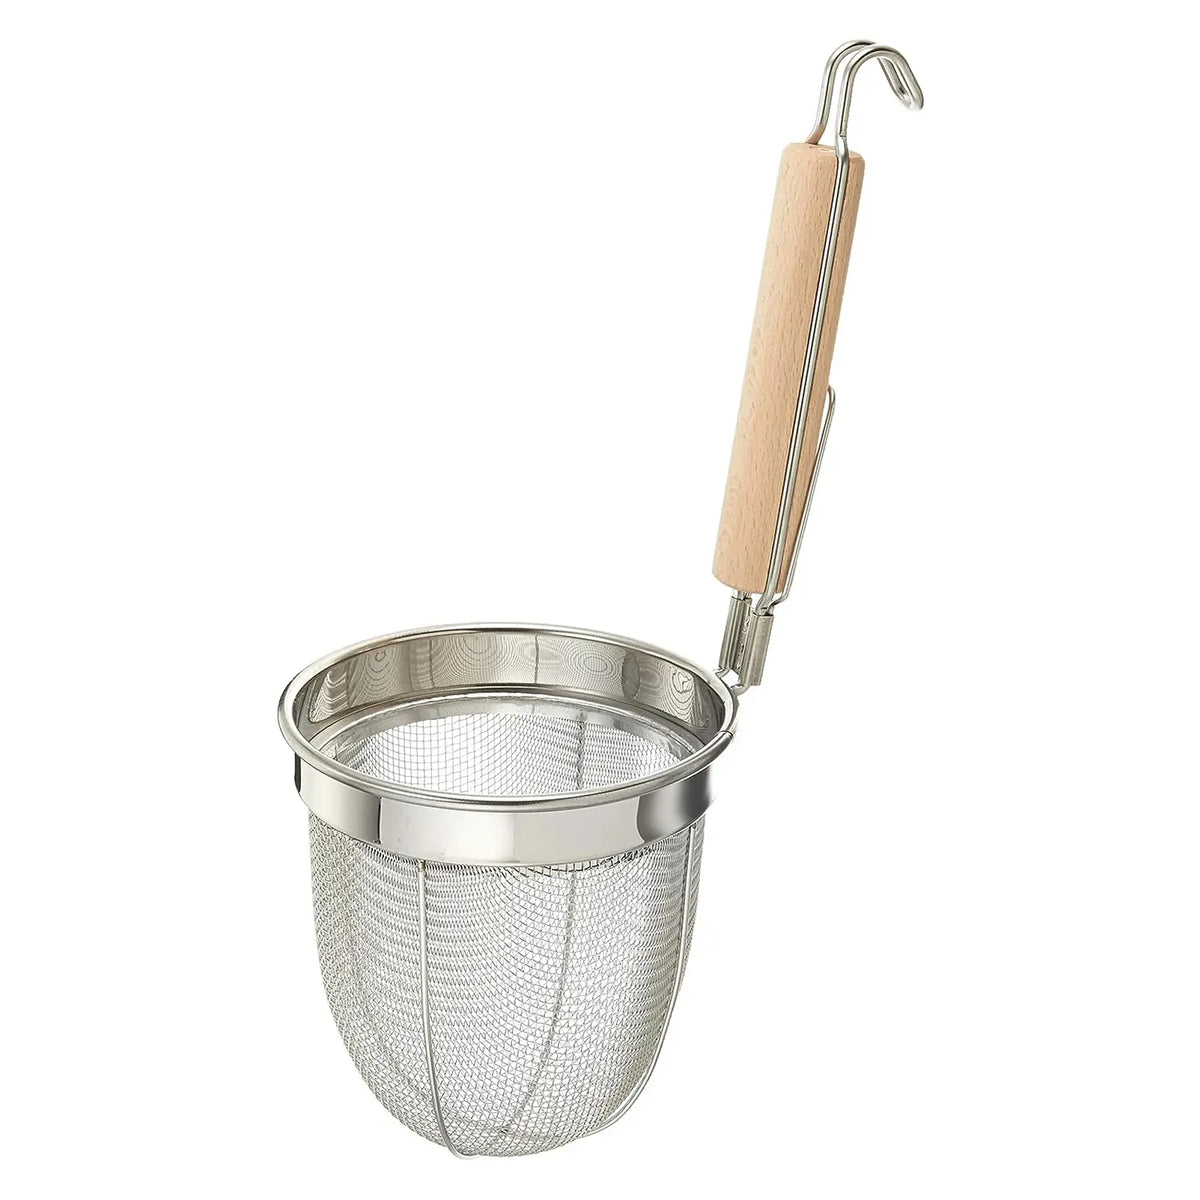 Fujiboshi Stainless Steel Udon Tebo Noodle Strainer Round Base with Wooden Handle